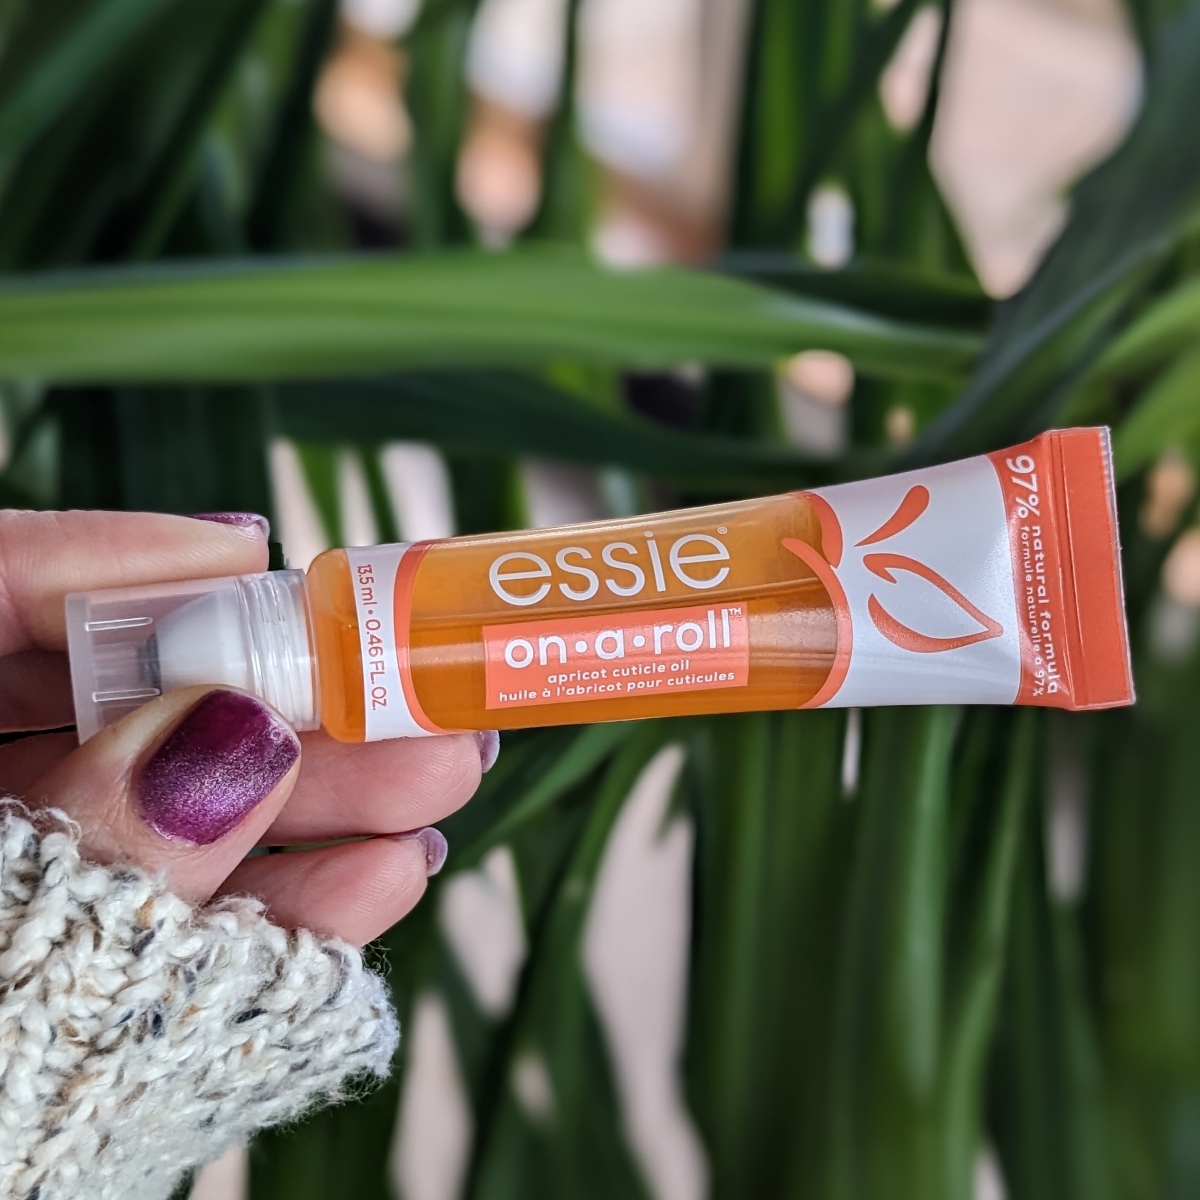 Essie On A Roll Apricot Cuticle Oil Reviews | abillion